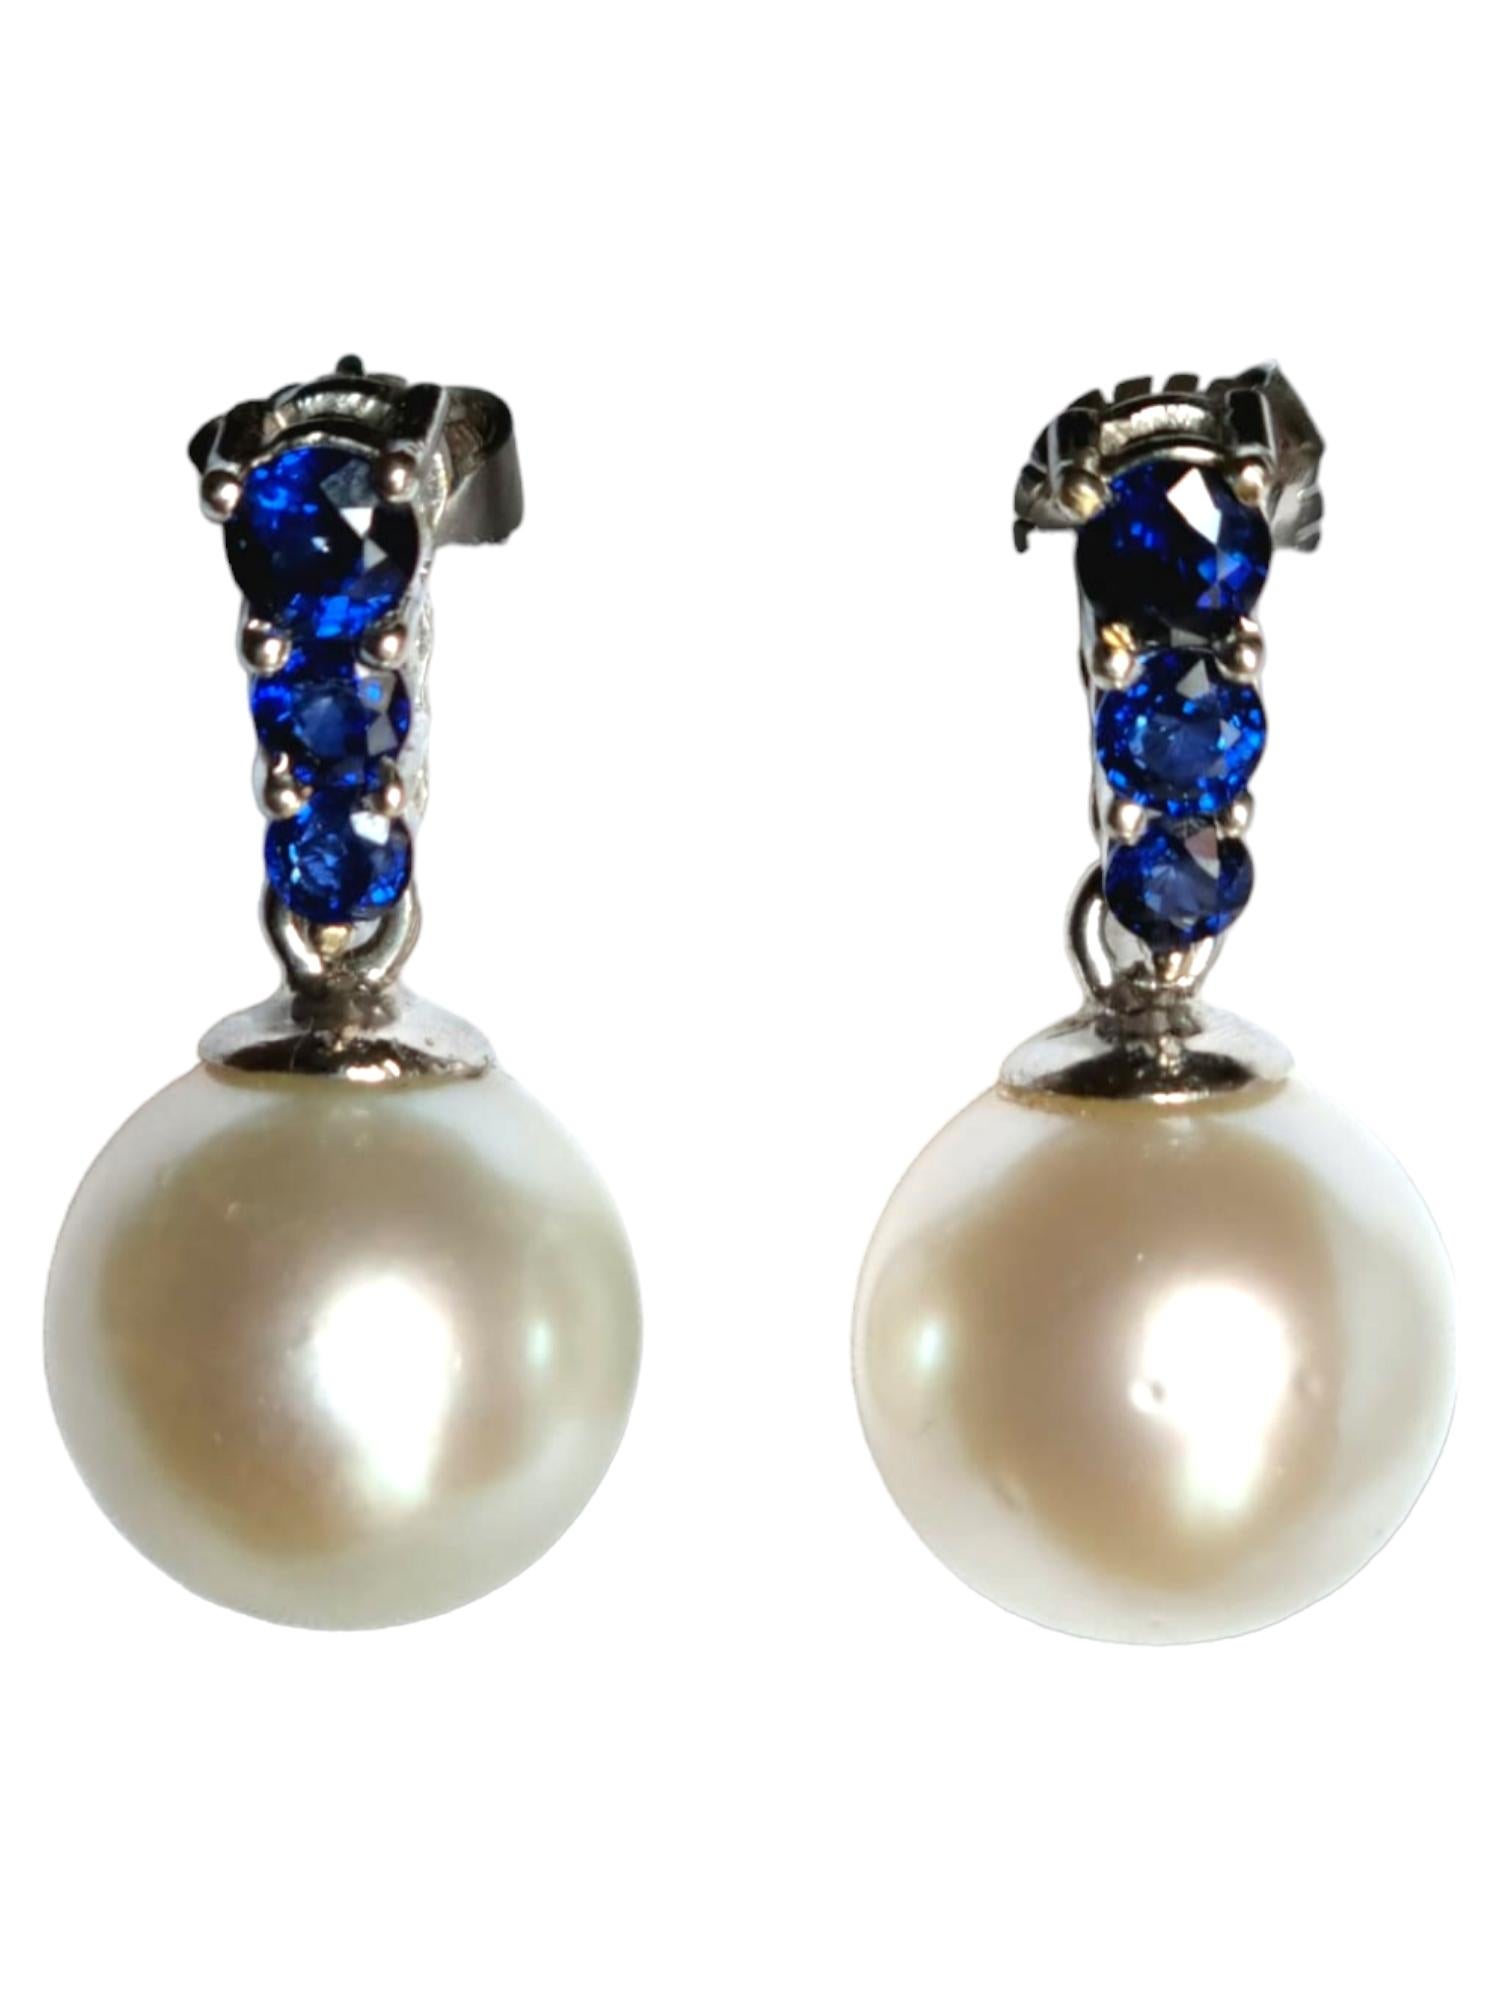 SOUTH SEA CULTURED PEARL GIA CERTIFIED & BLUE SAPPHIRE EARRINGS
Earrings: South Sea Pearls diameter 13.9 mm, round shape, 19.02 and 18.68 carats respectively; see other pearl characteristics as per the certificate. GIA Report Nº 6162646020 7-1 & 8-1